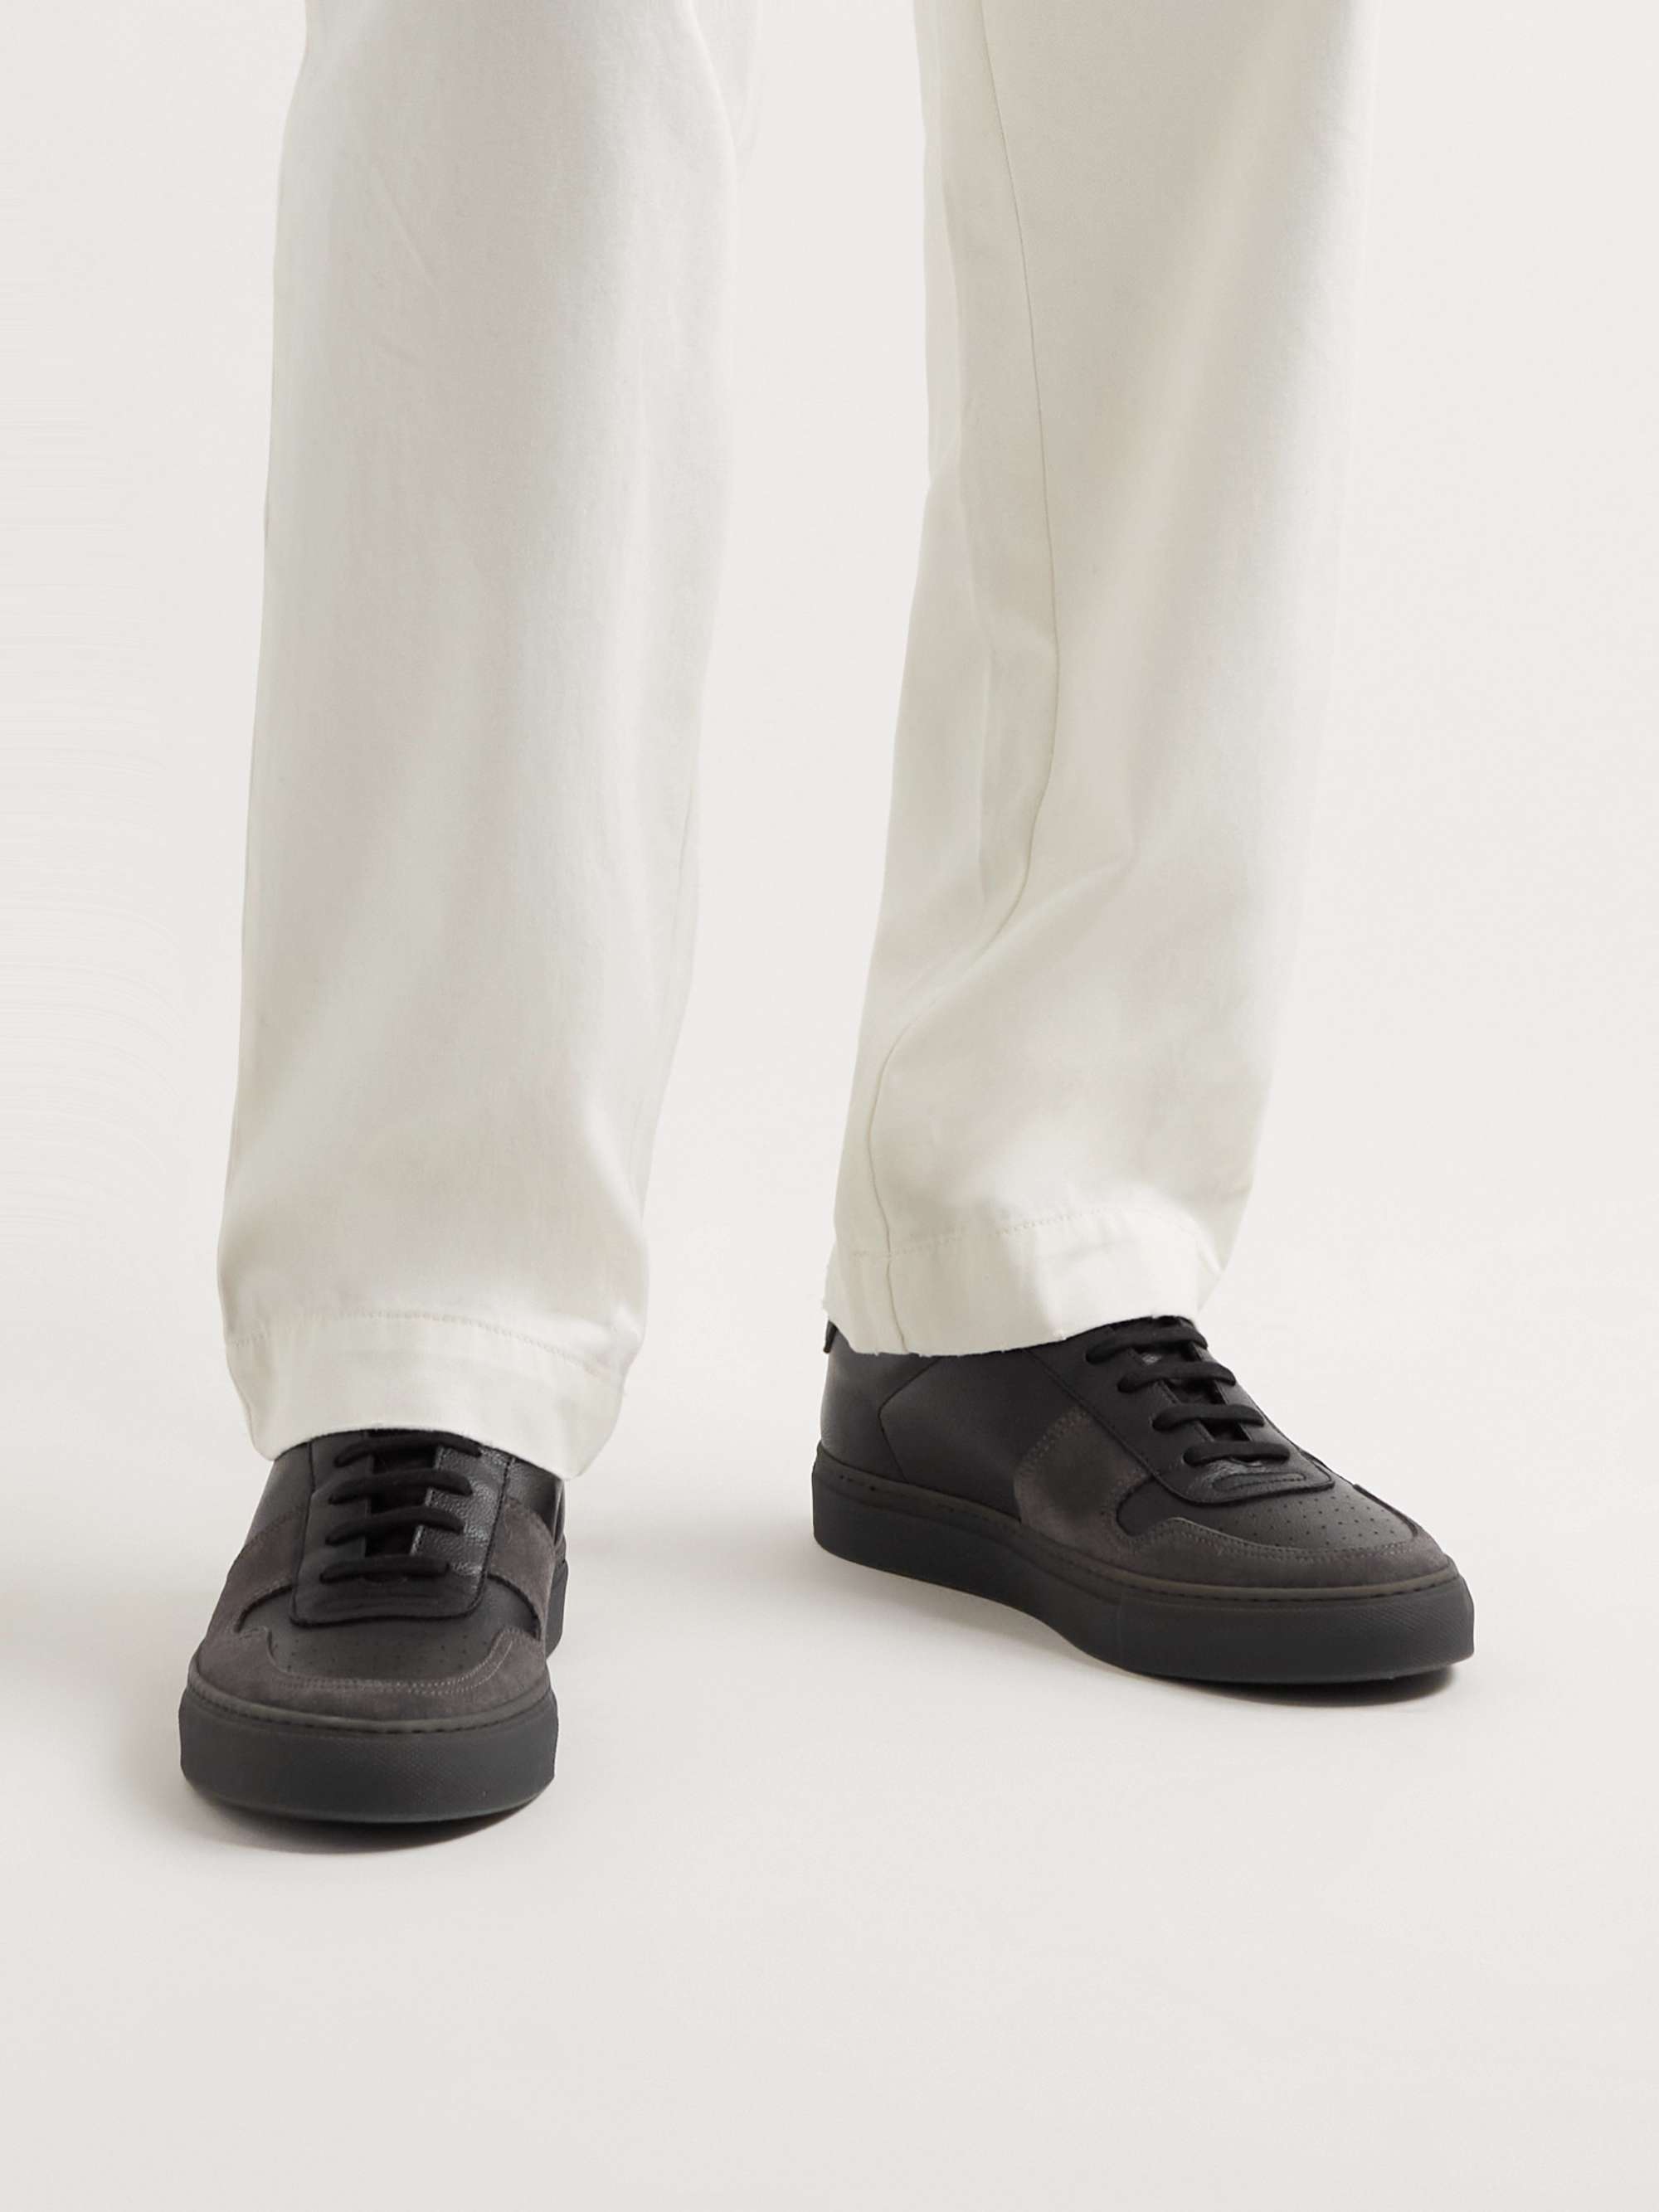 COMMON PROJECTS BBall Full-Grain Leather and Suede Sneakers